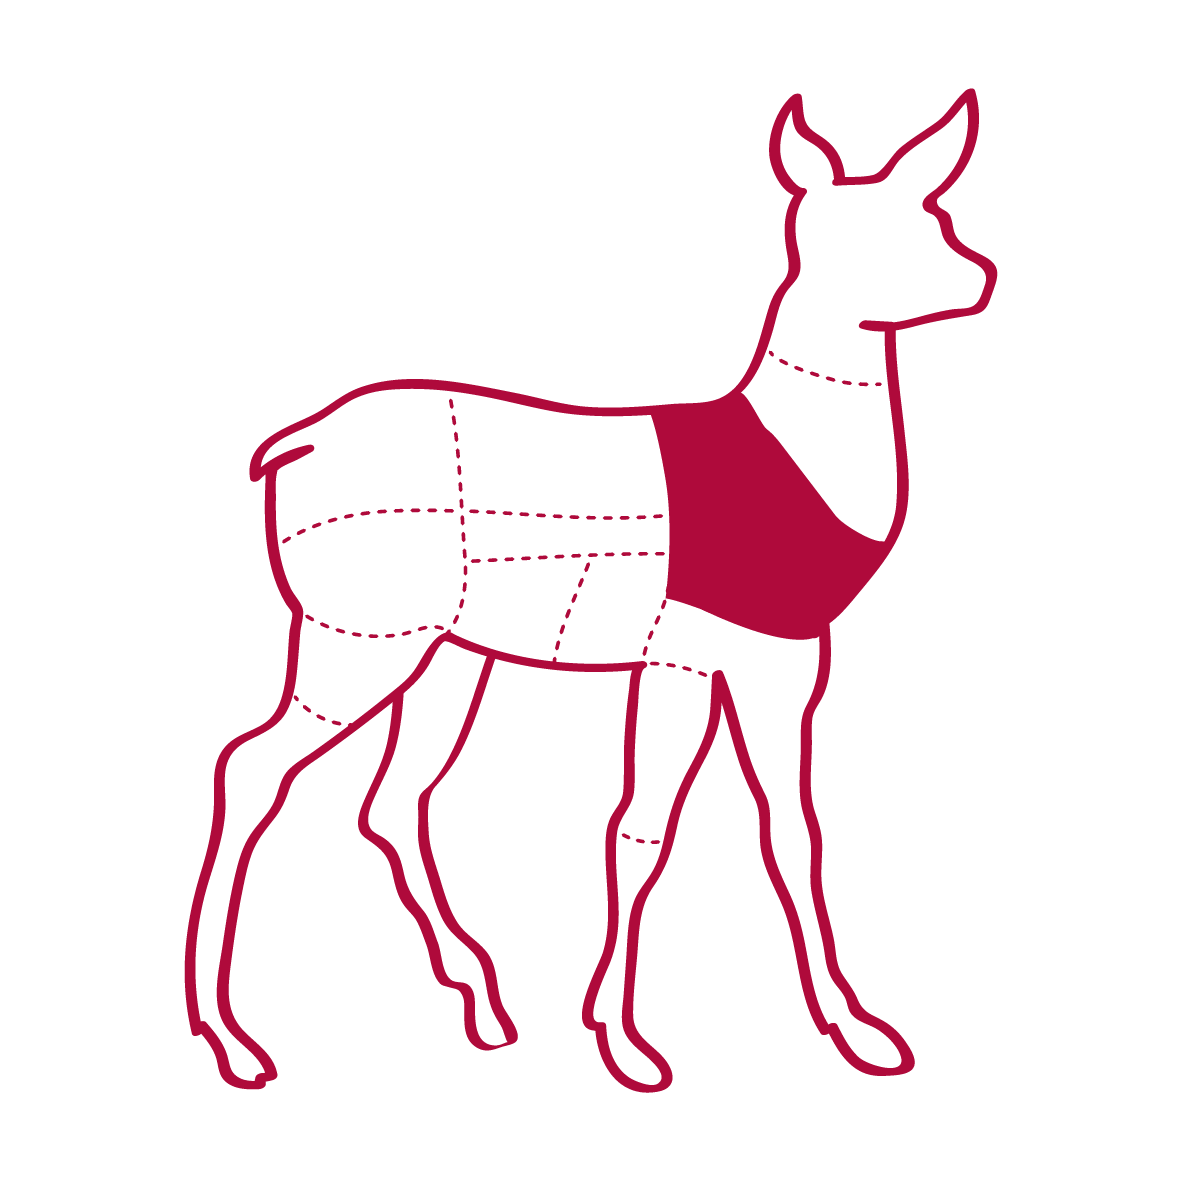 an illustration of a venison carcass showing where mince come from